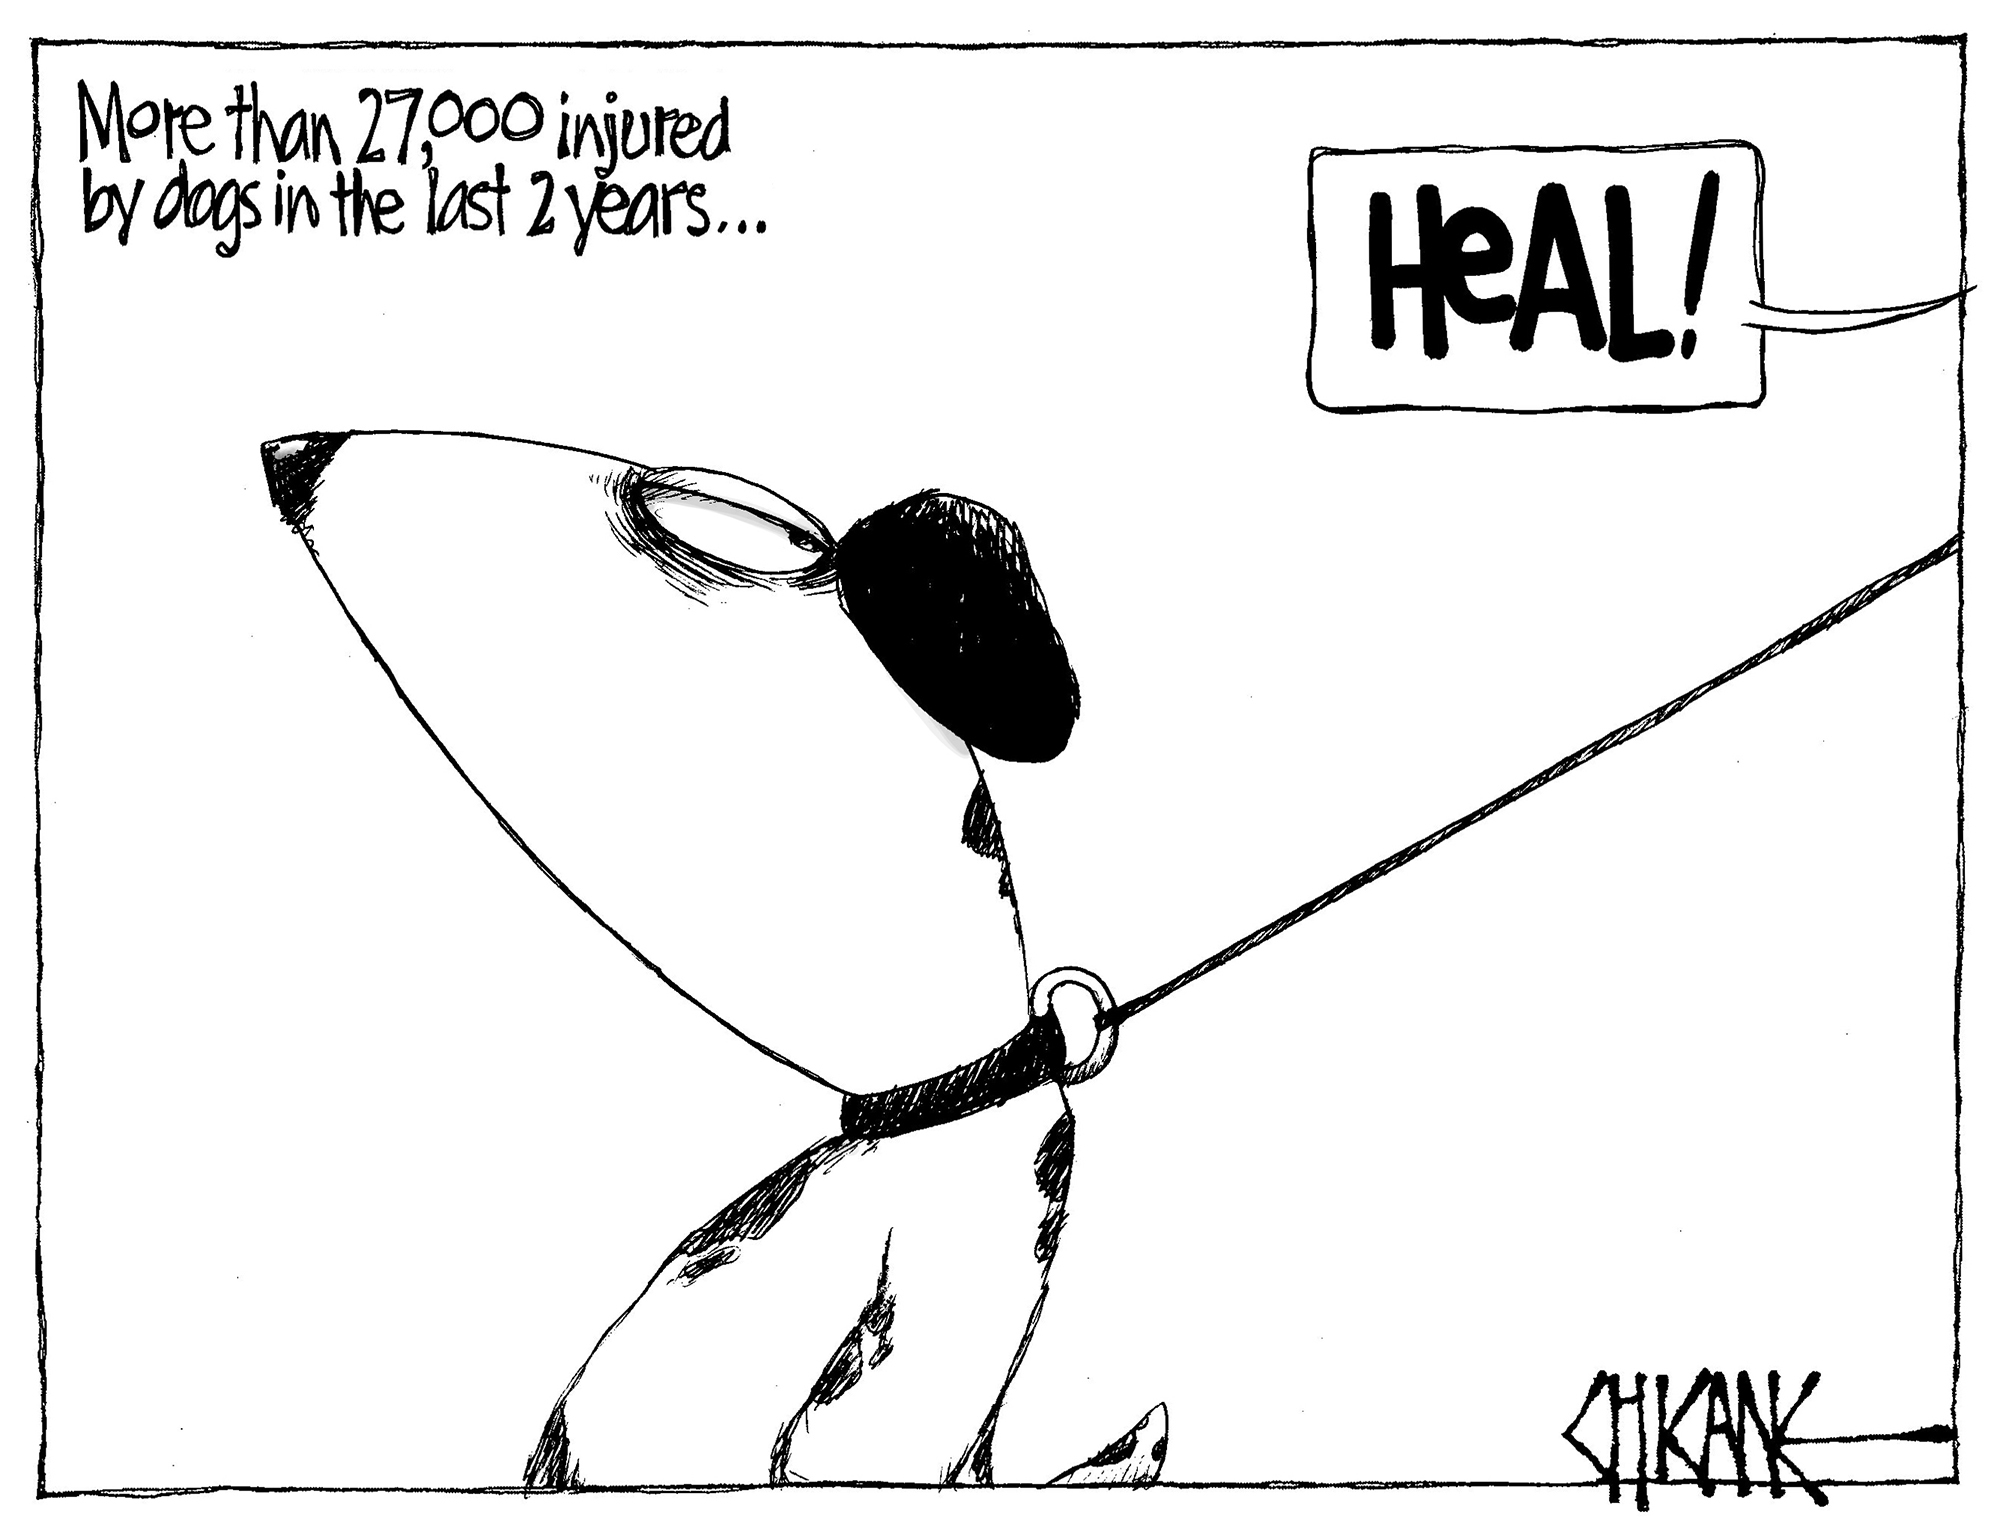 More than 27,000 injured by dogs in the last two years, cartoon dog. Cartoon by Chicane.